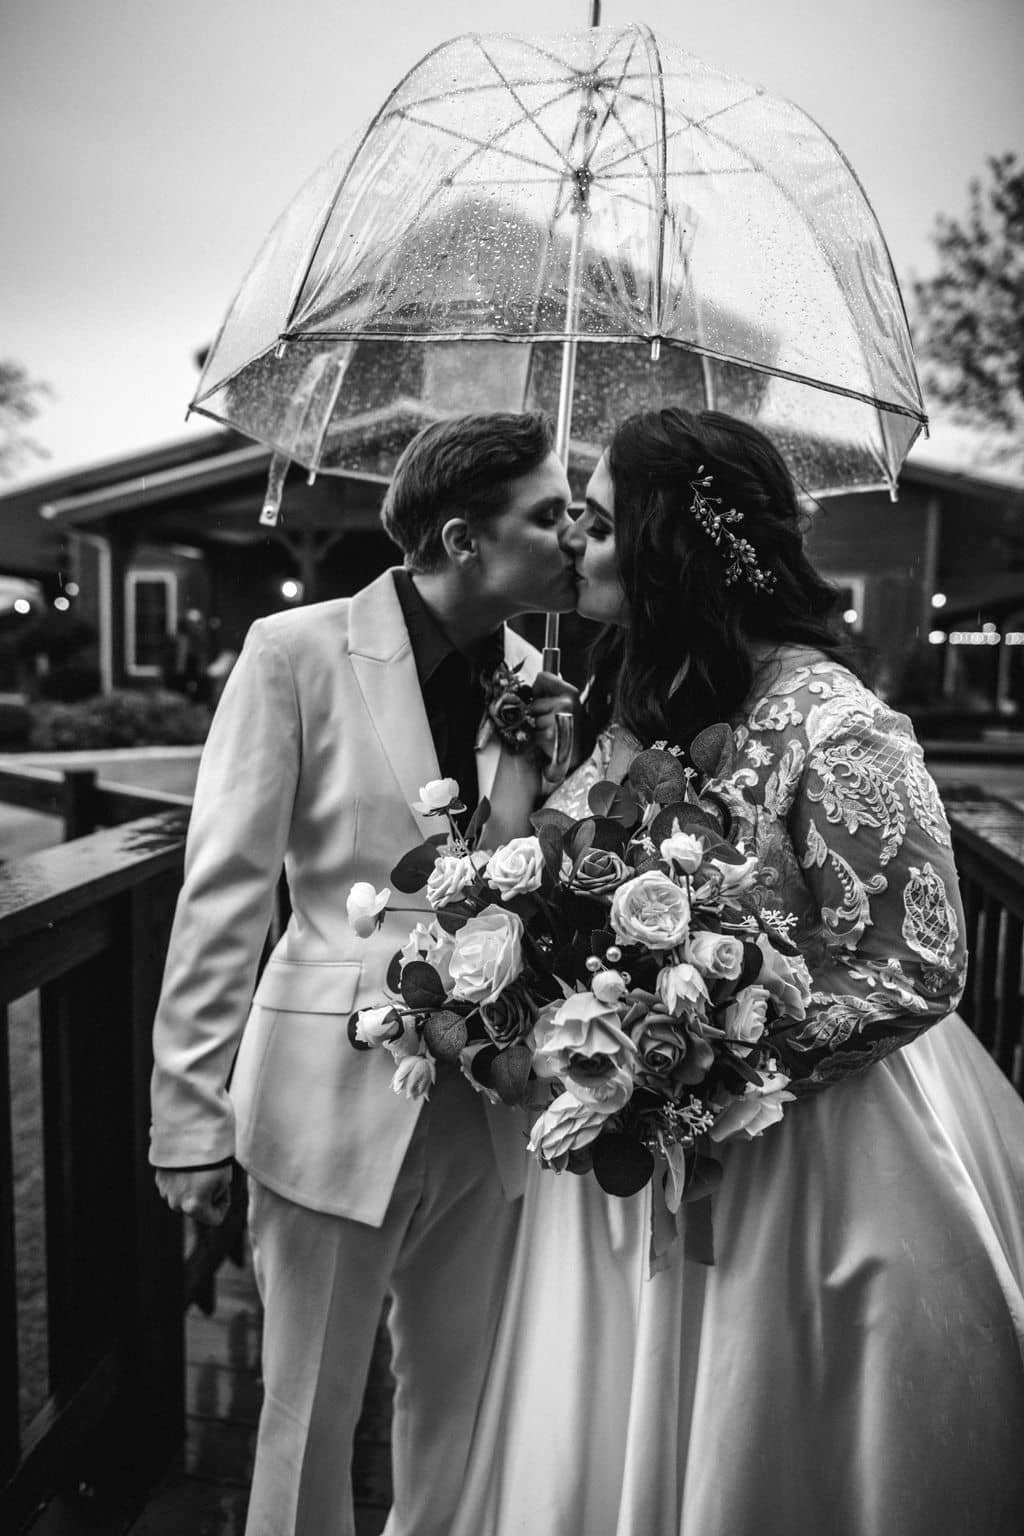 two brides kissing under the umbrella at a bryan-college station wedding venue in an inclusive client experience